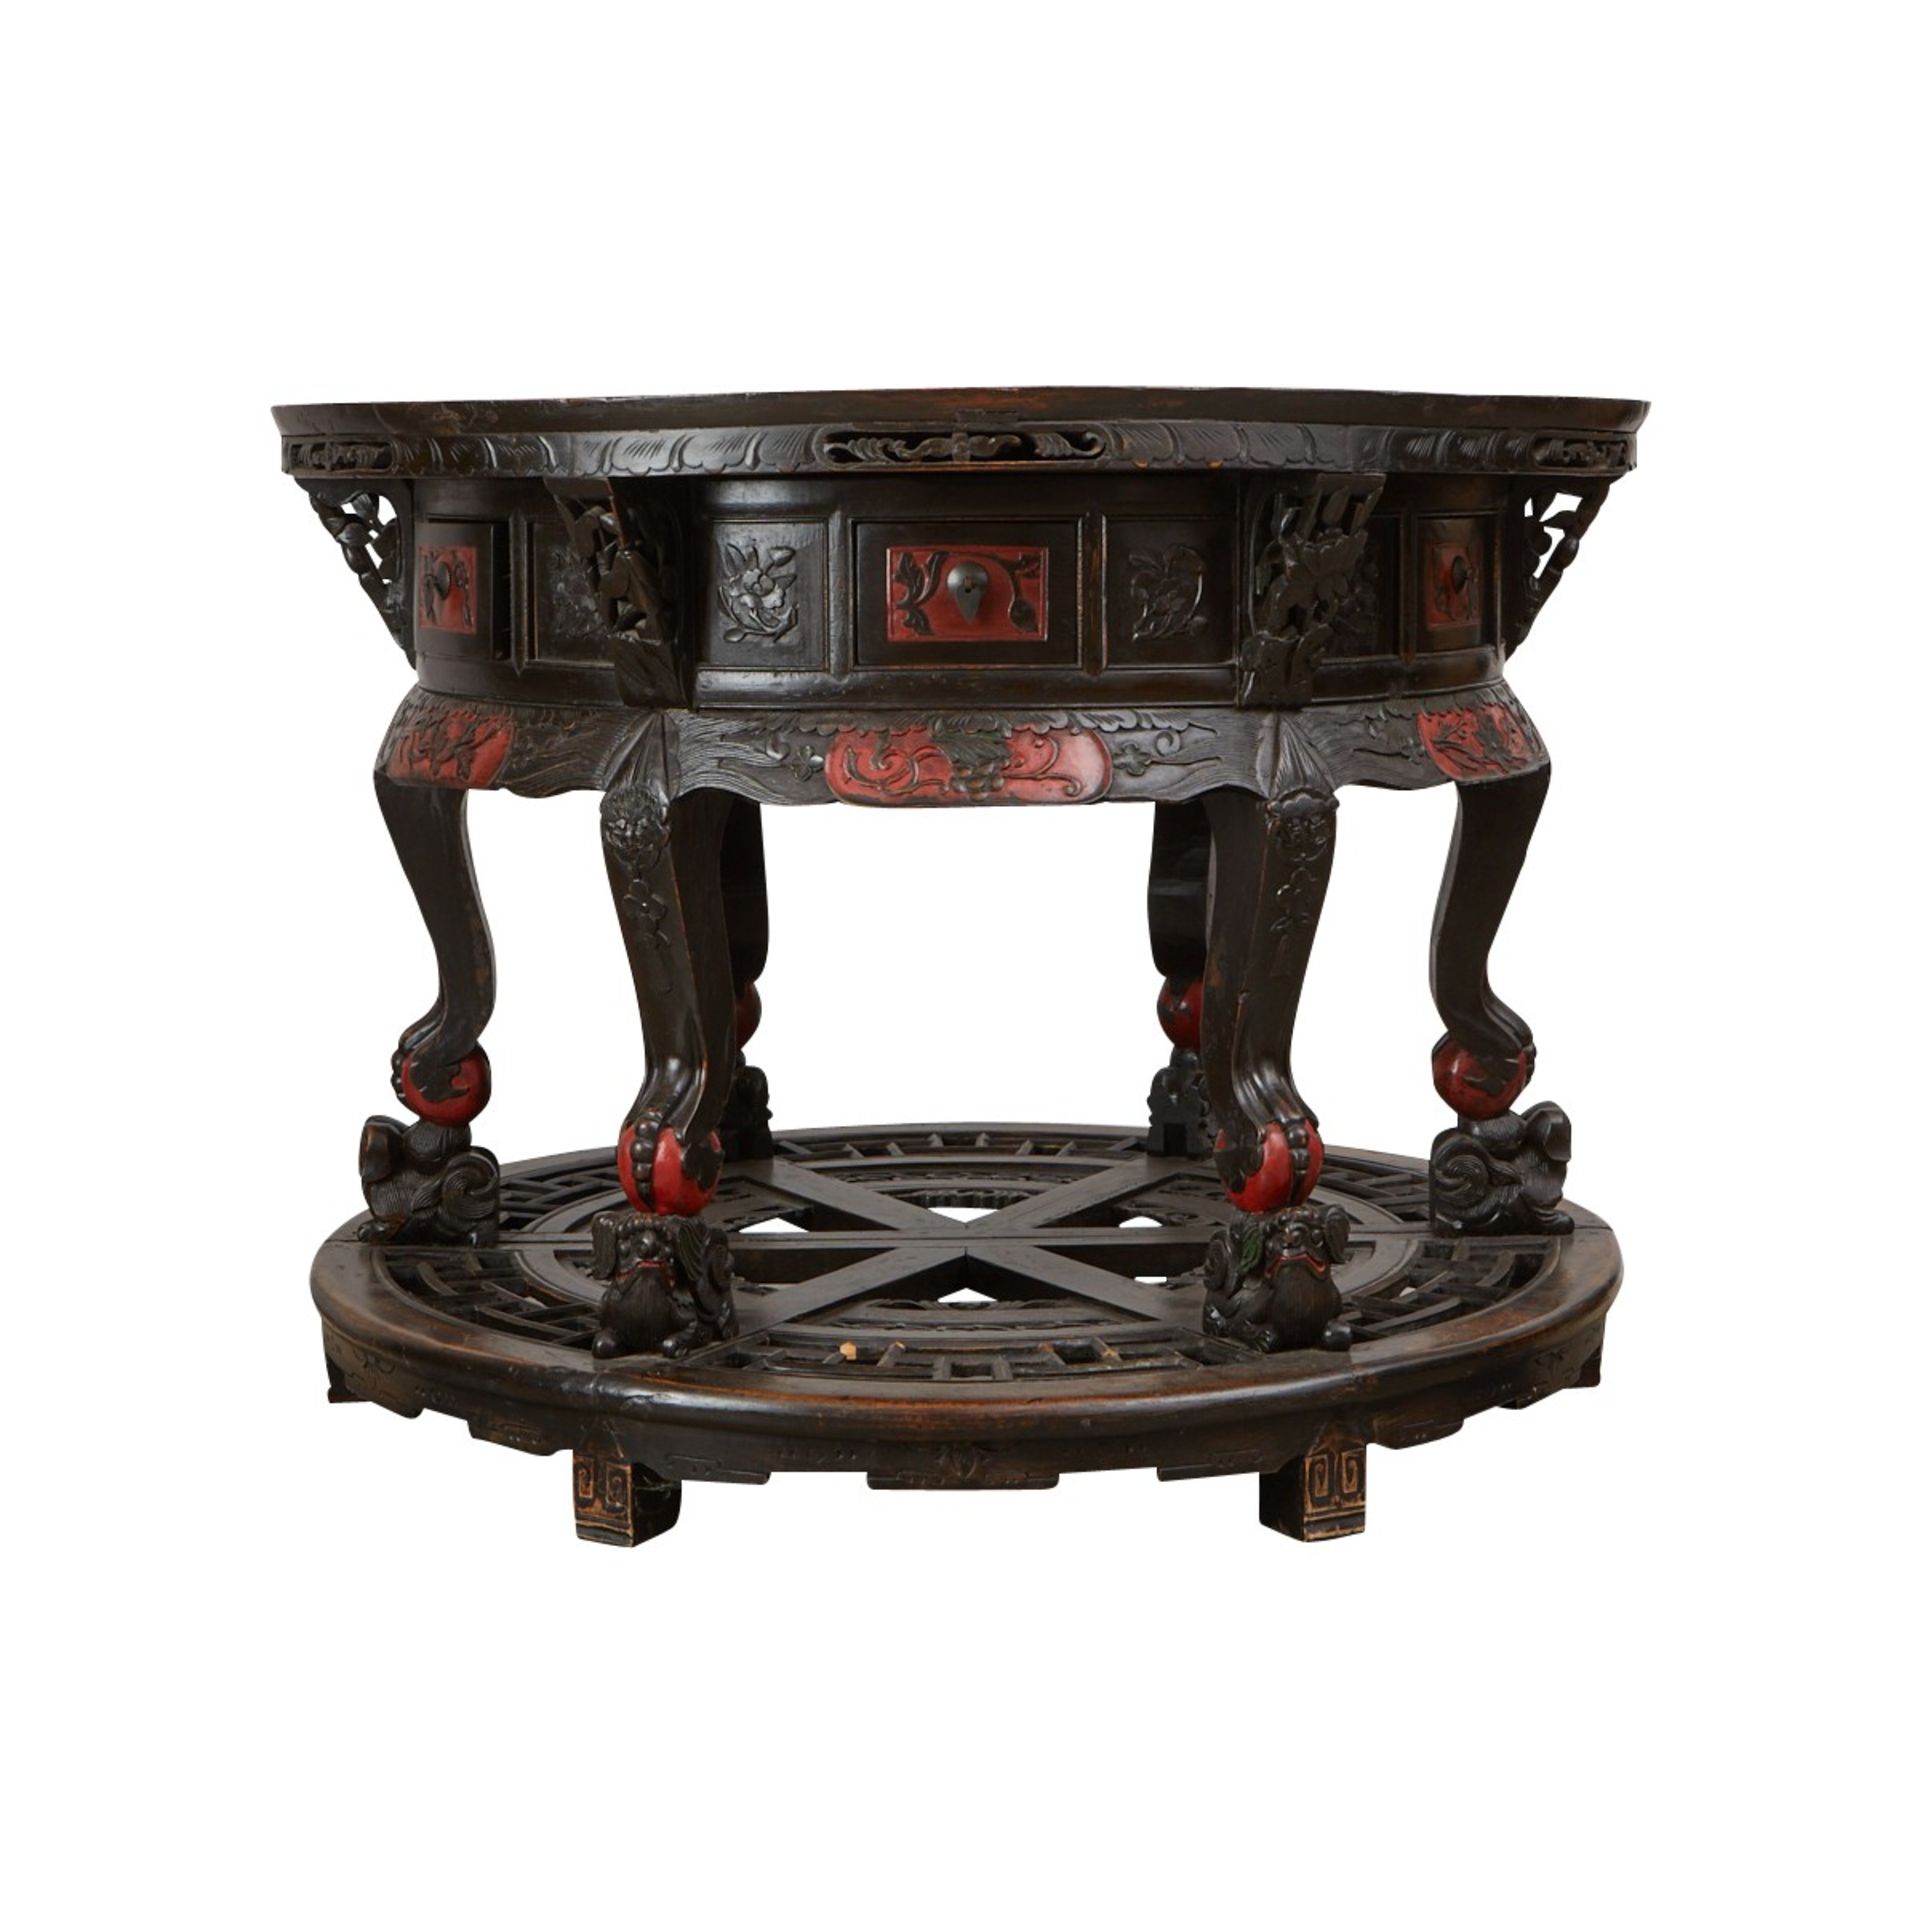 Chinese Round Carved Wood Table w/ Drawers 19th c. - Image 6 of 11